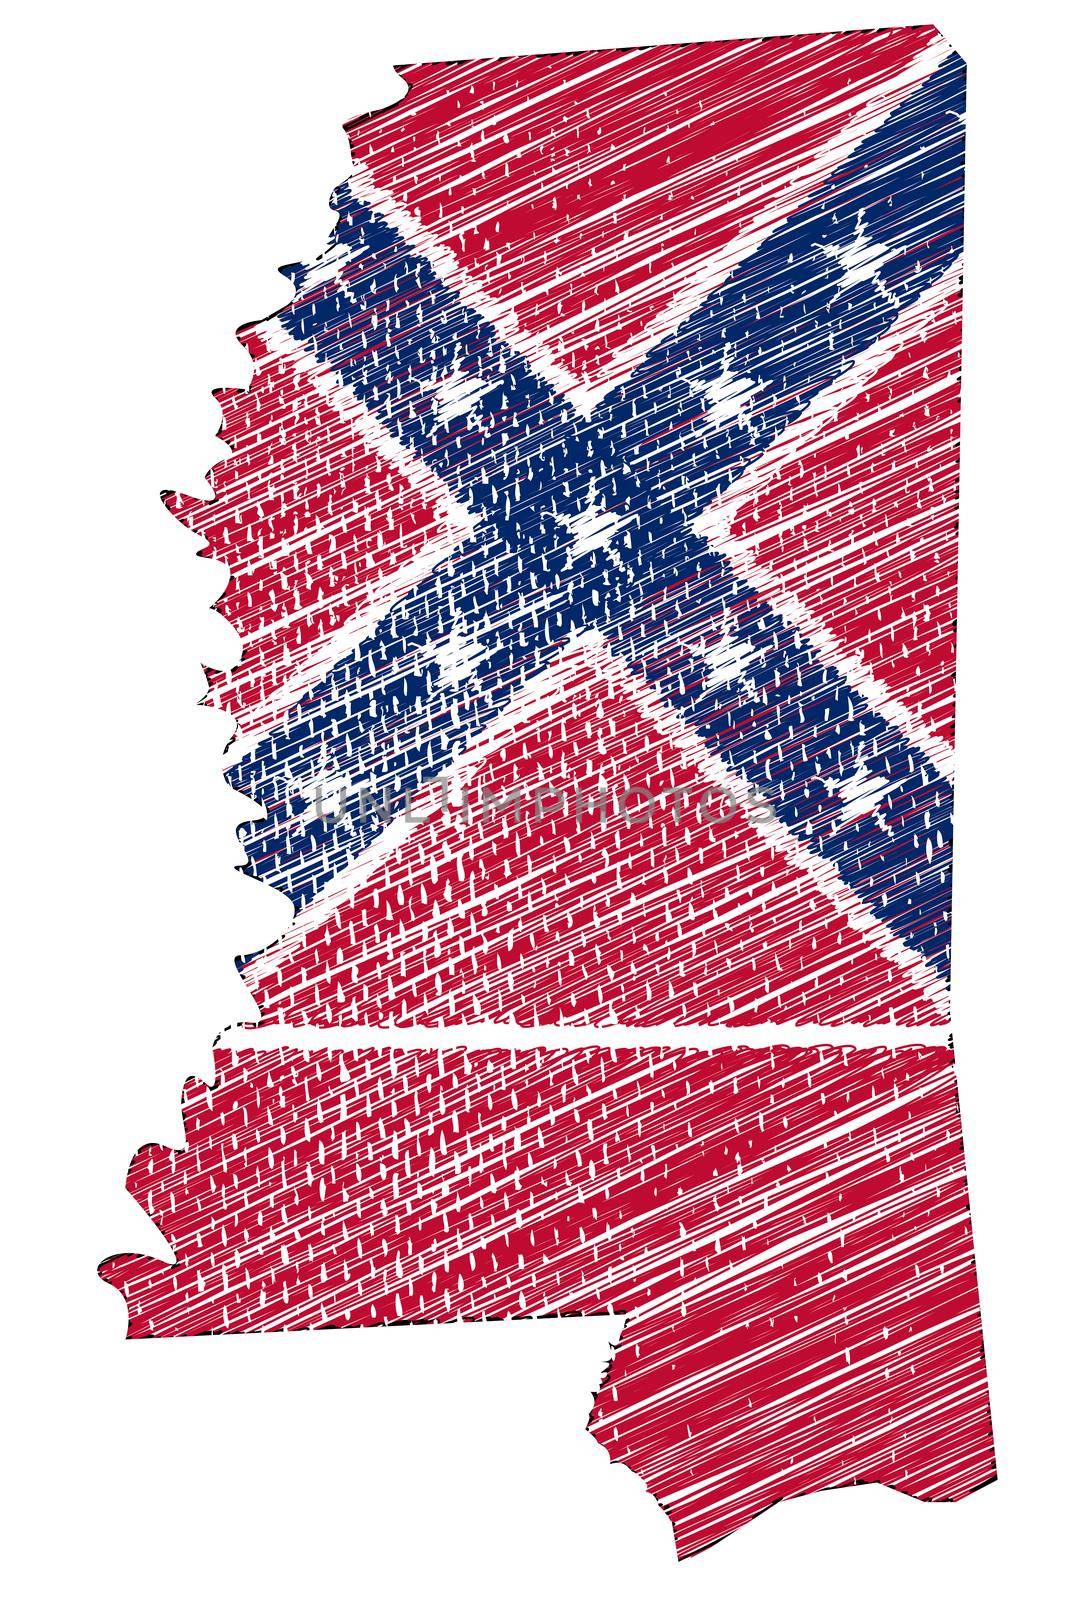 State map outline of Mississippi over a white background with grunge flag inset